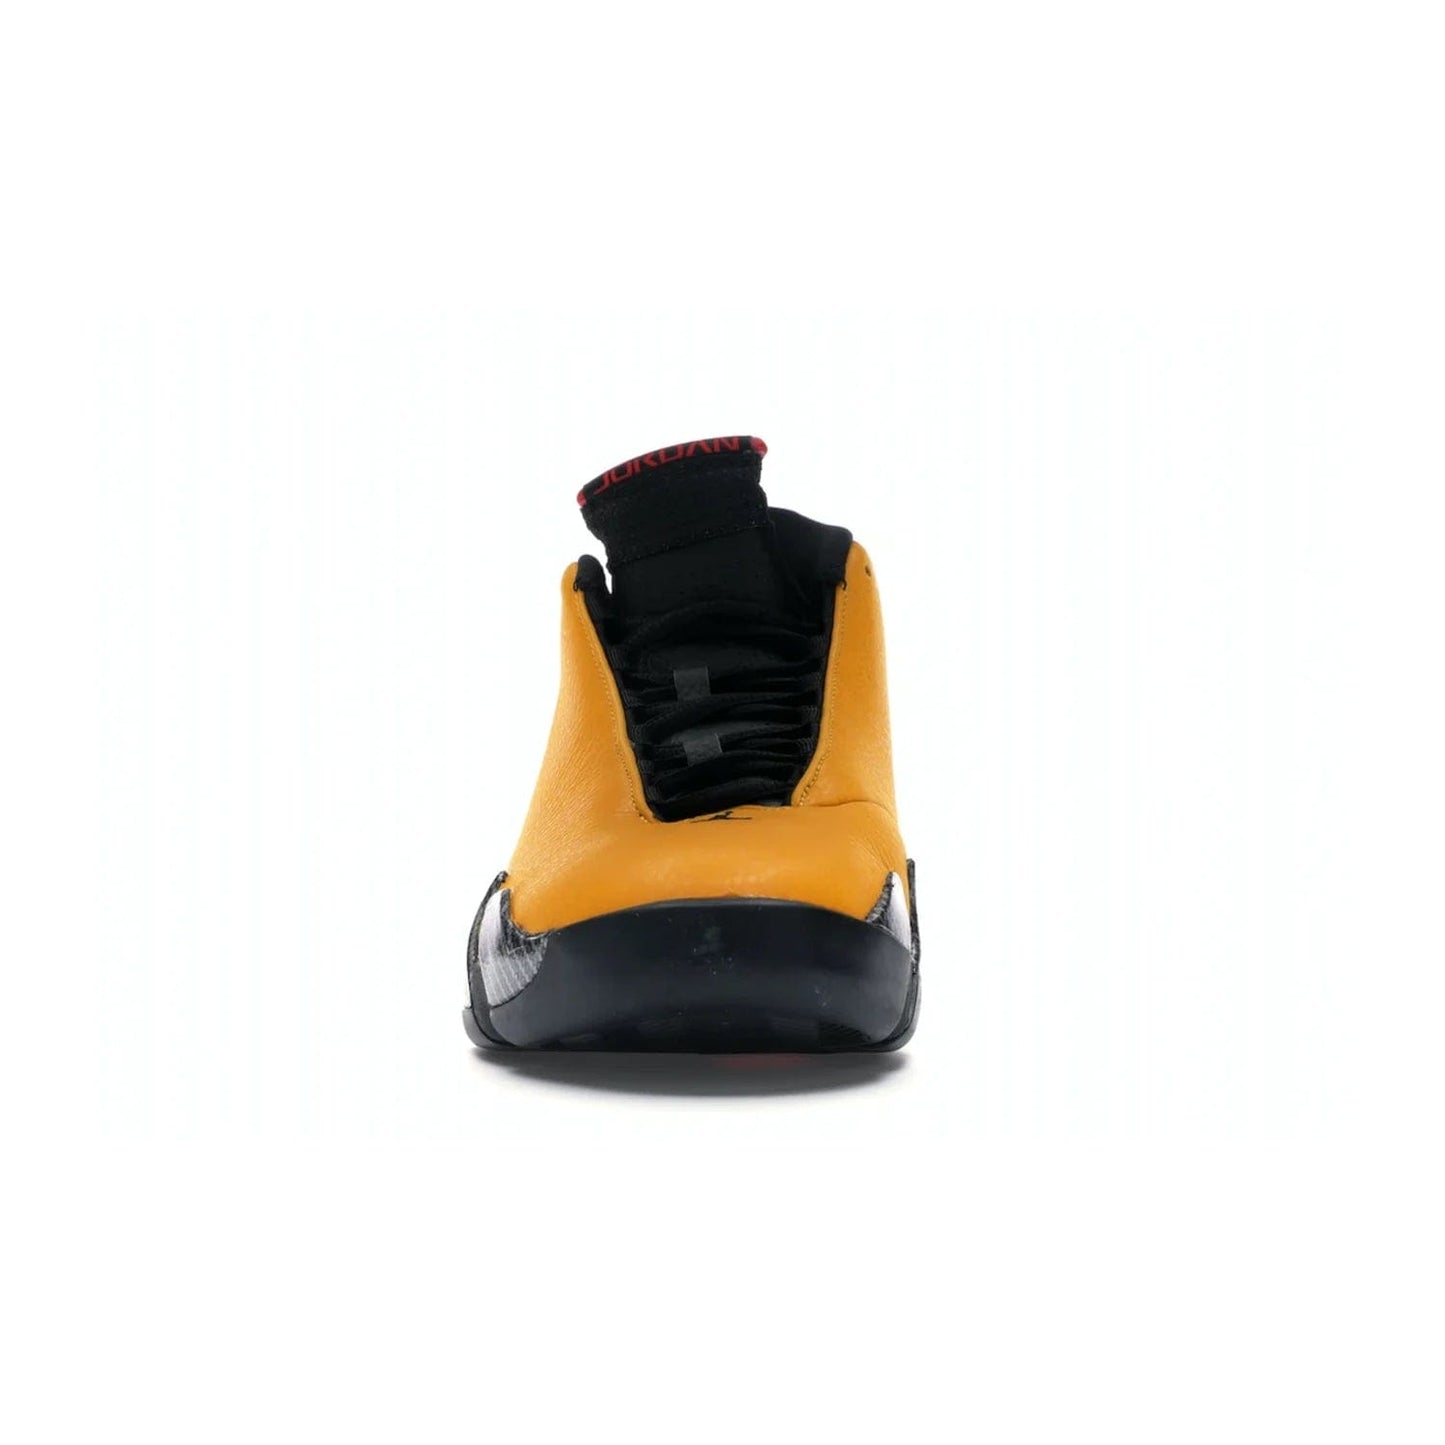 Jordan 14 Retro University Gold - Image 10 - Only at www.BallersClubKickz.com - Air Jordan 14 Retro University Gold: High-quality leather sneaker with Jumpman, tongue & heel logos. Zoom Air units & herringbone traction for superior comfort. University Gold outsole for stylish streetwear.